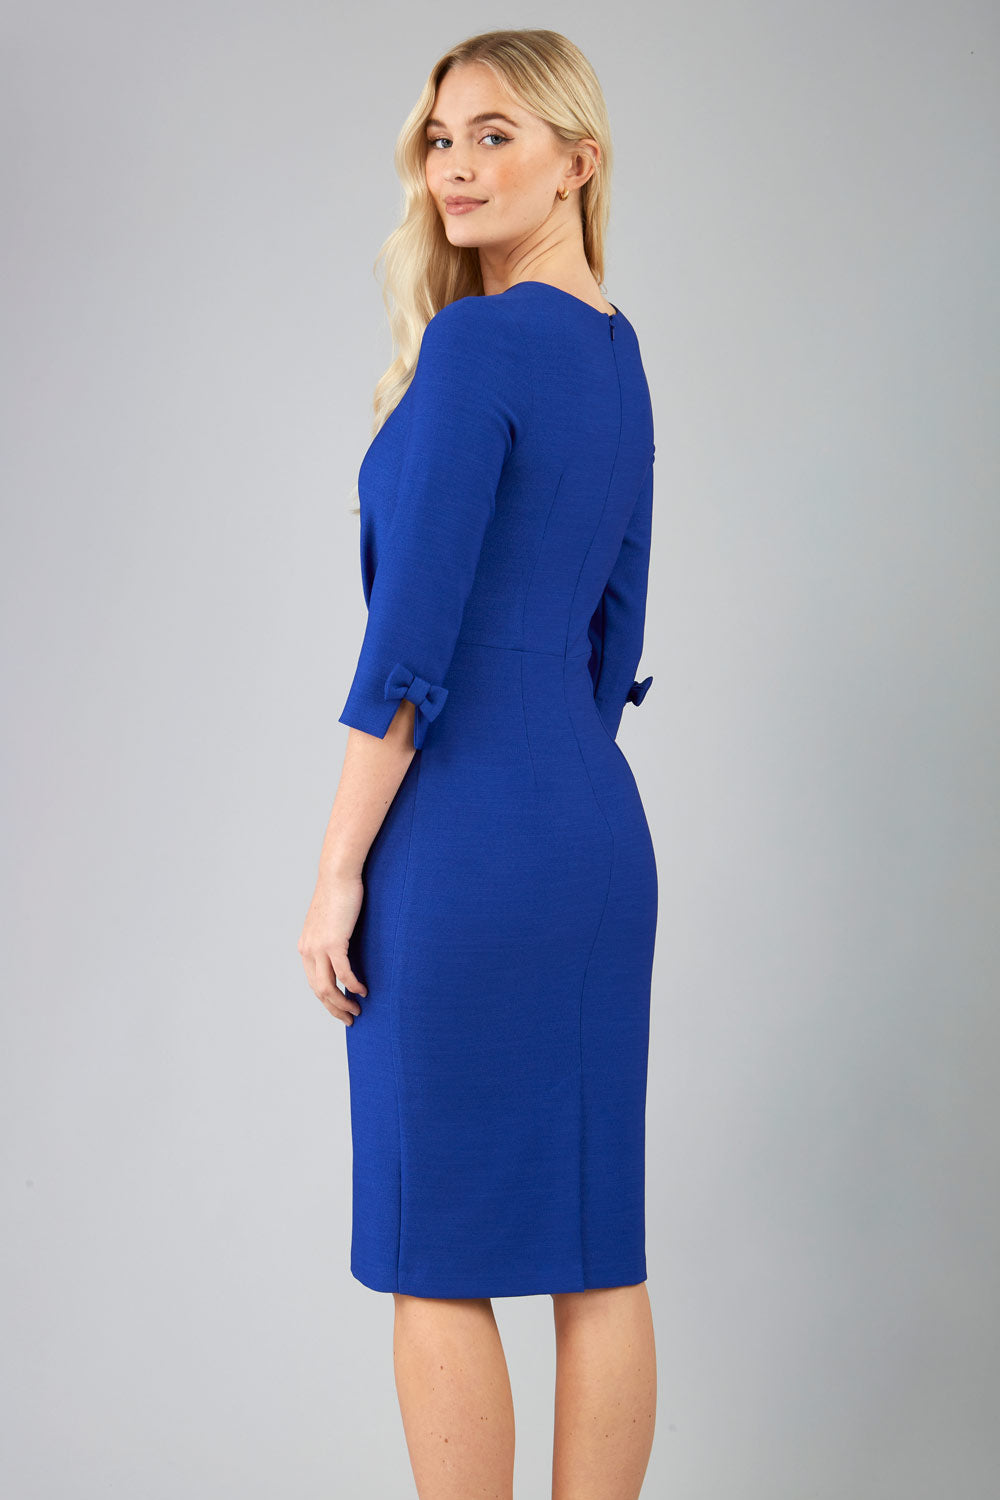 blonde model is wearing diva catwalk logan round neck sleeved pencil dress with side arrow pleating detail in royal blue back